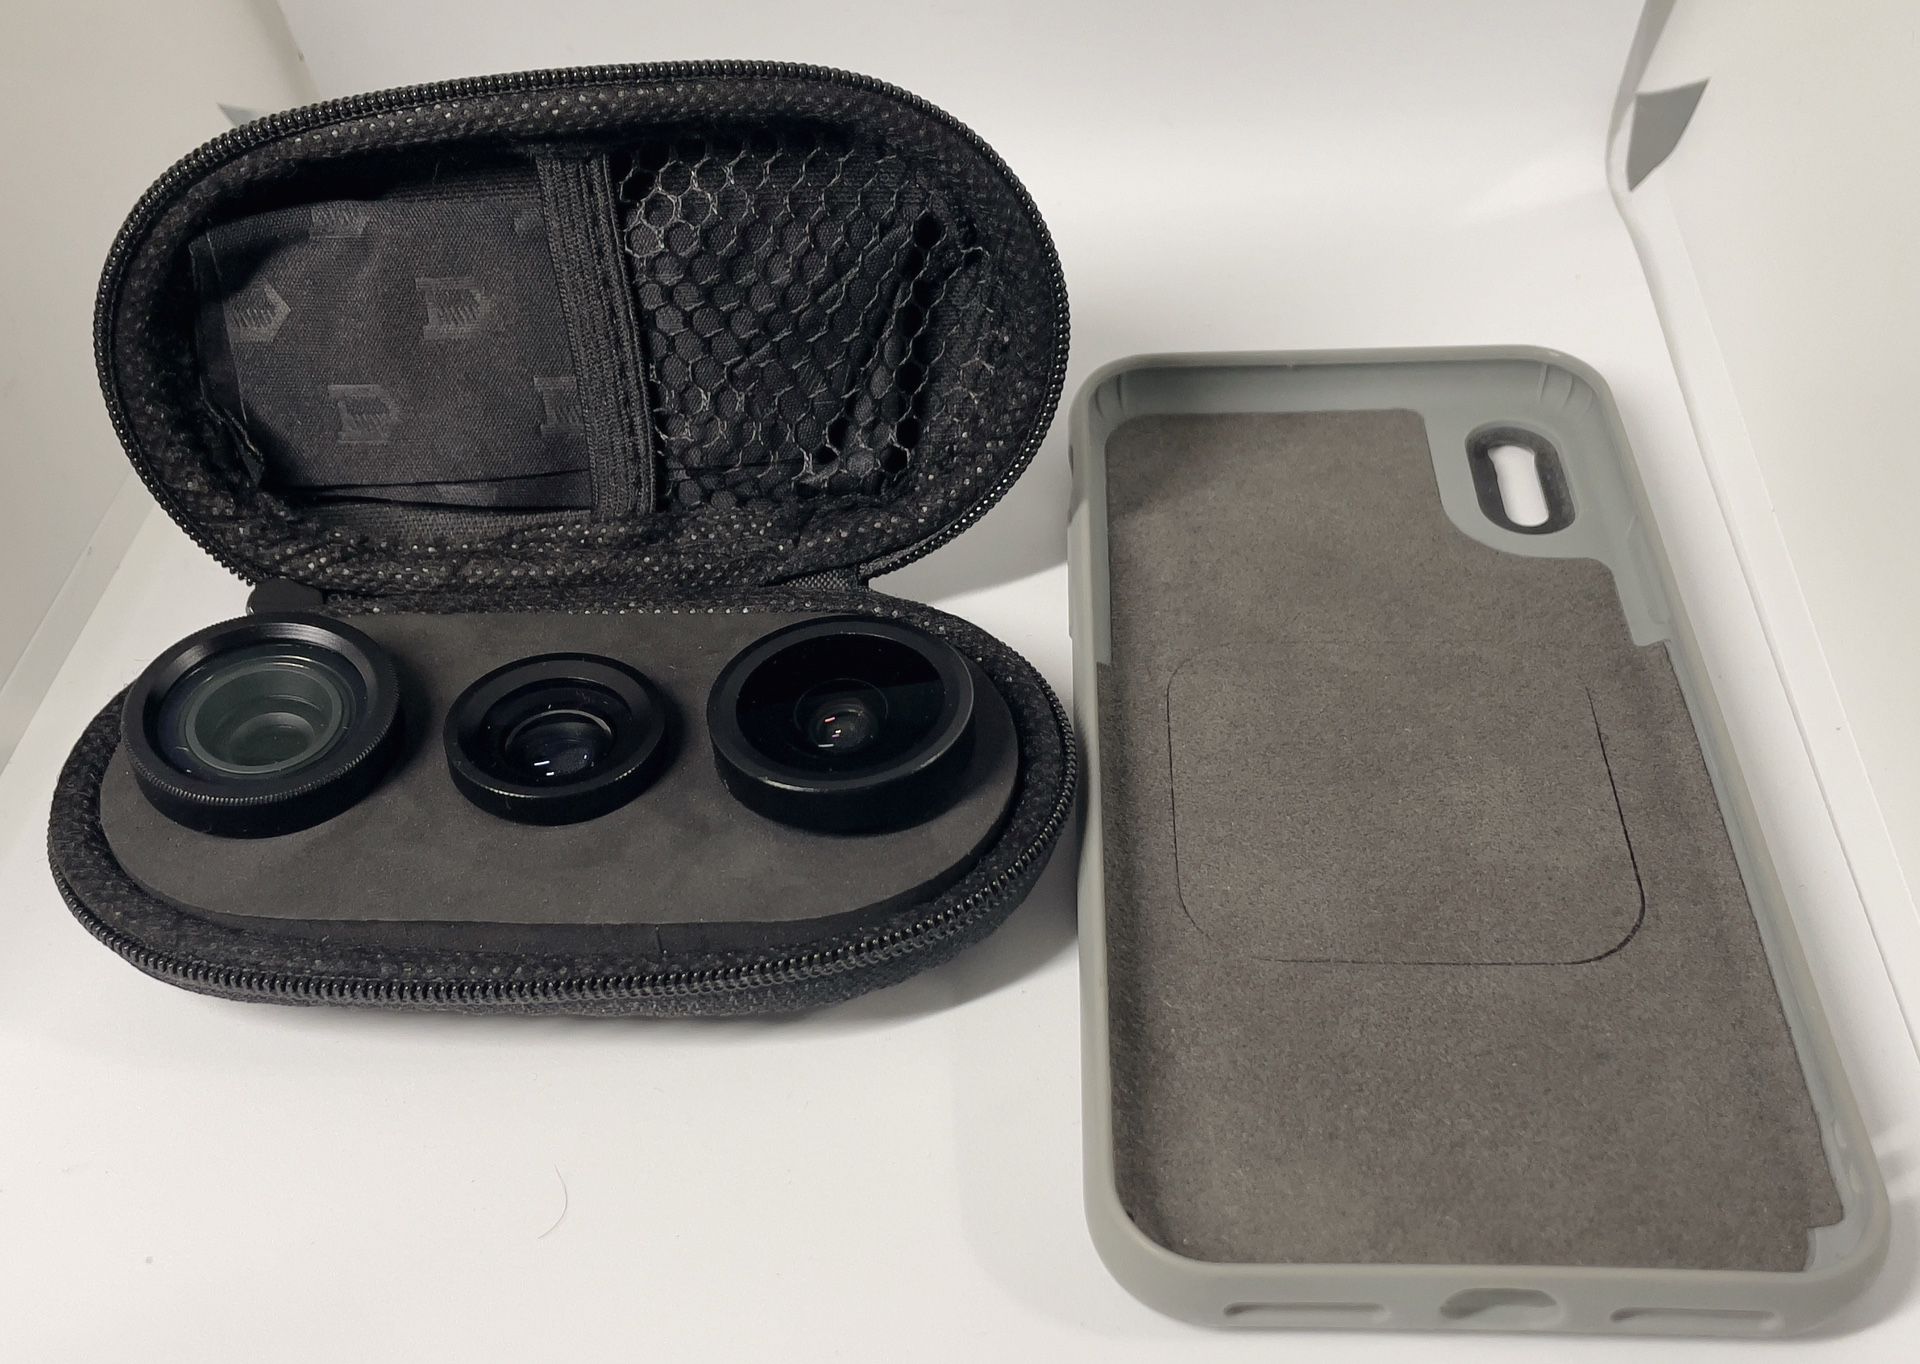 Hitcase & Lenses For Iphone X Or Xs